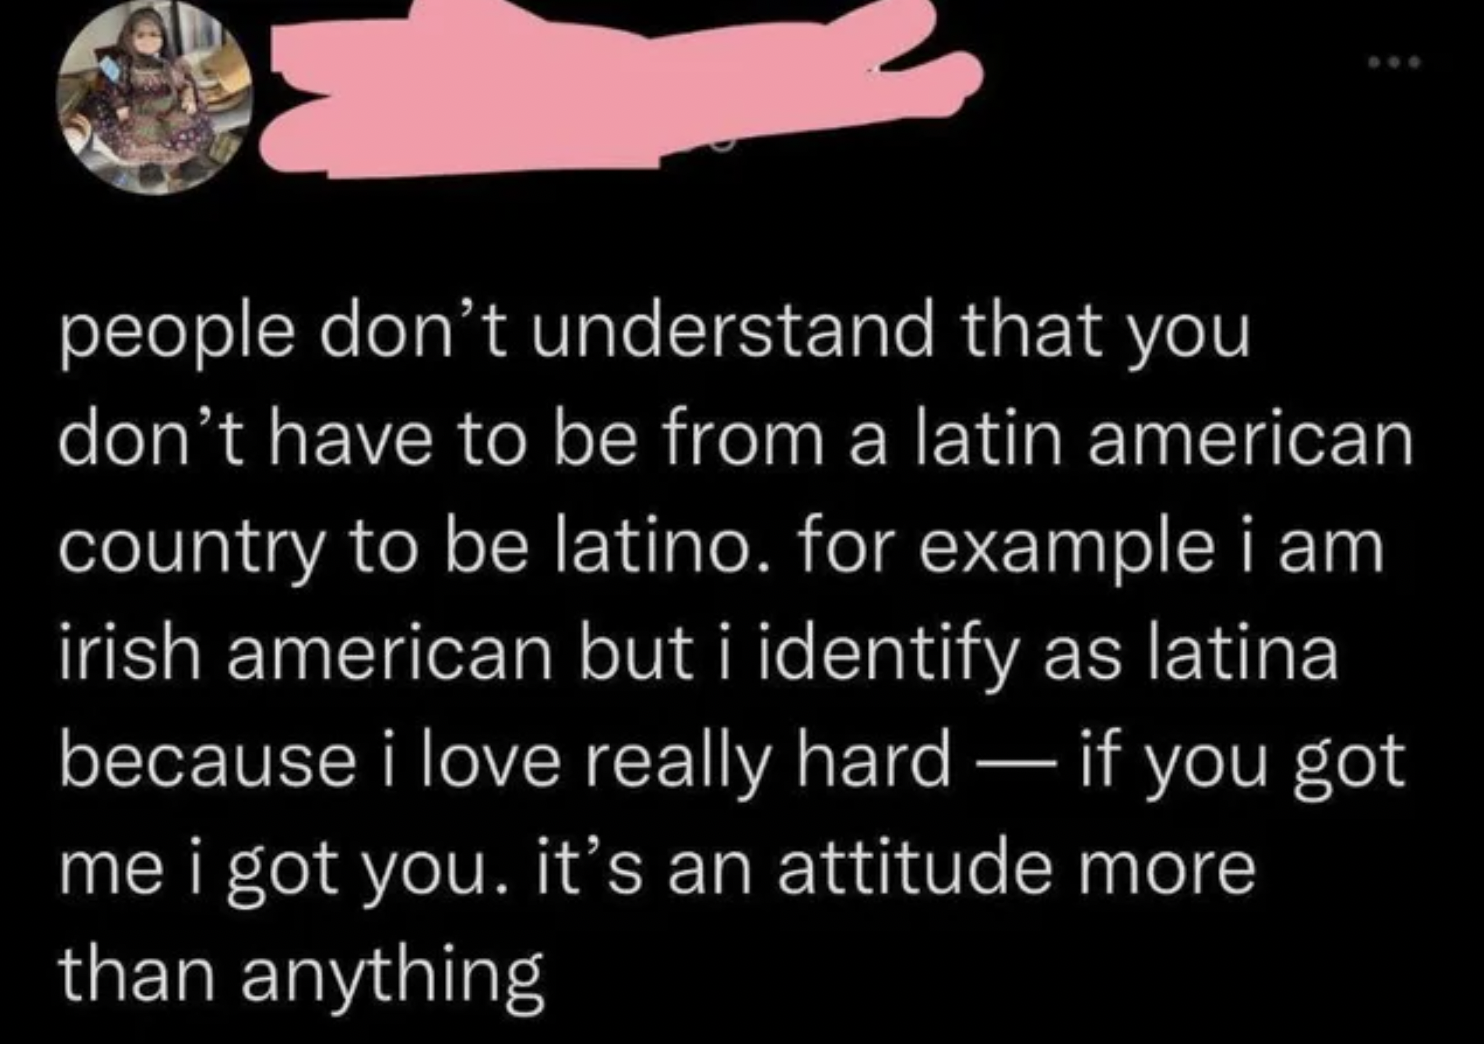 Confidently Incorrect - light - people don't understand that you don't have to be from a latin american country to be latino.